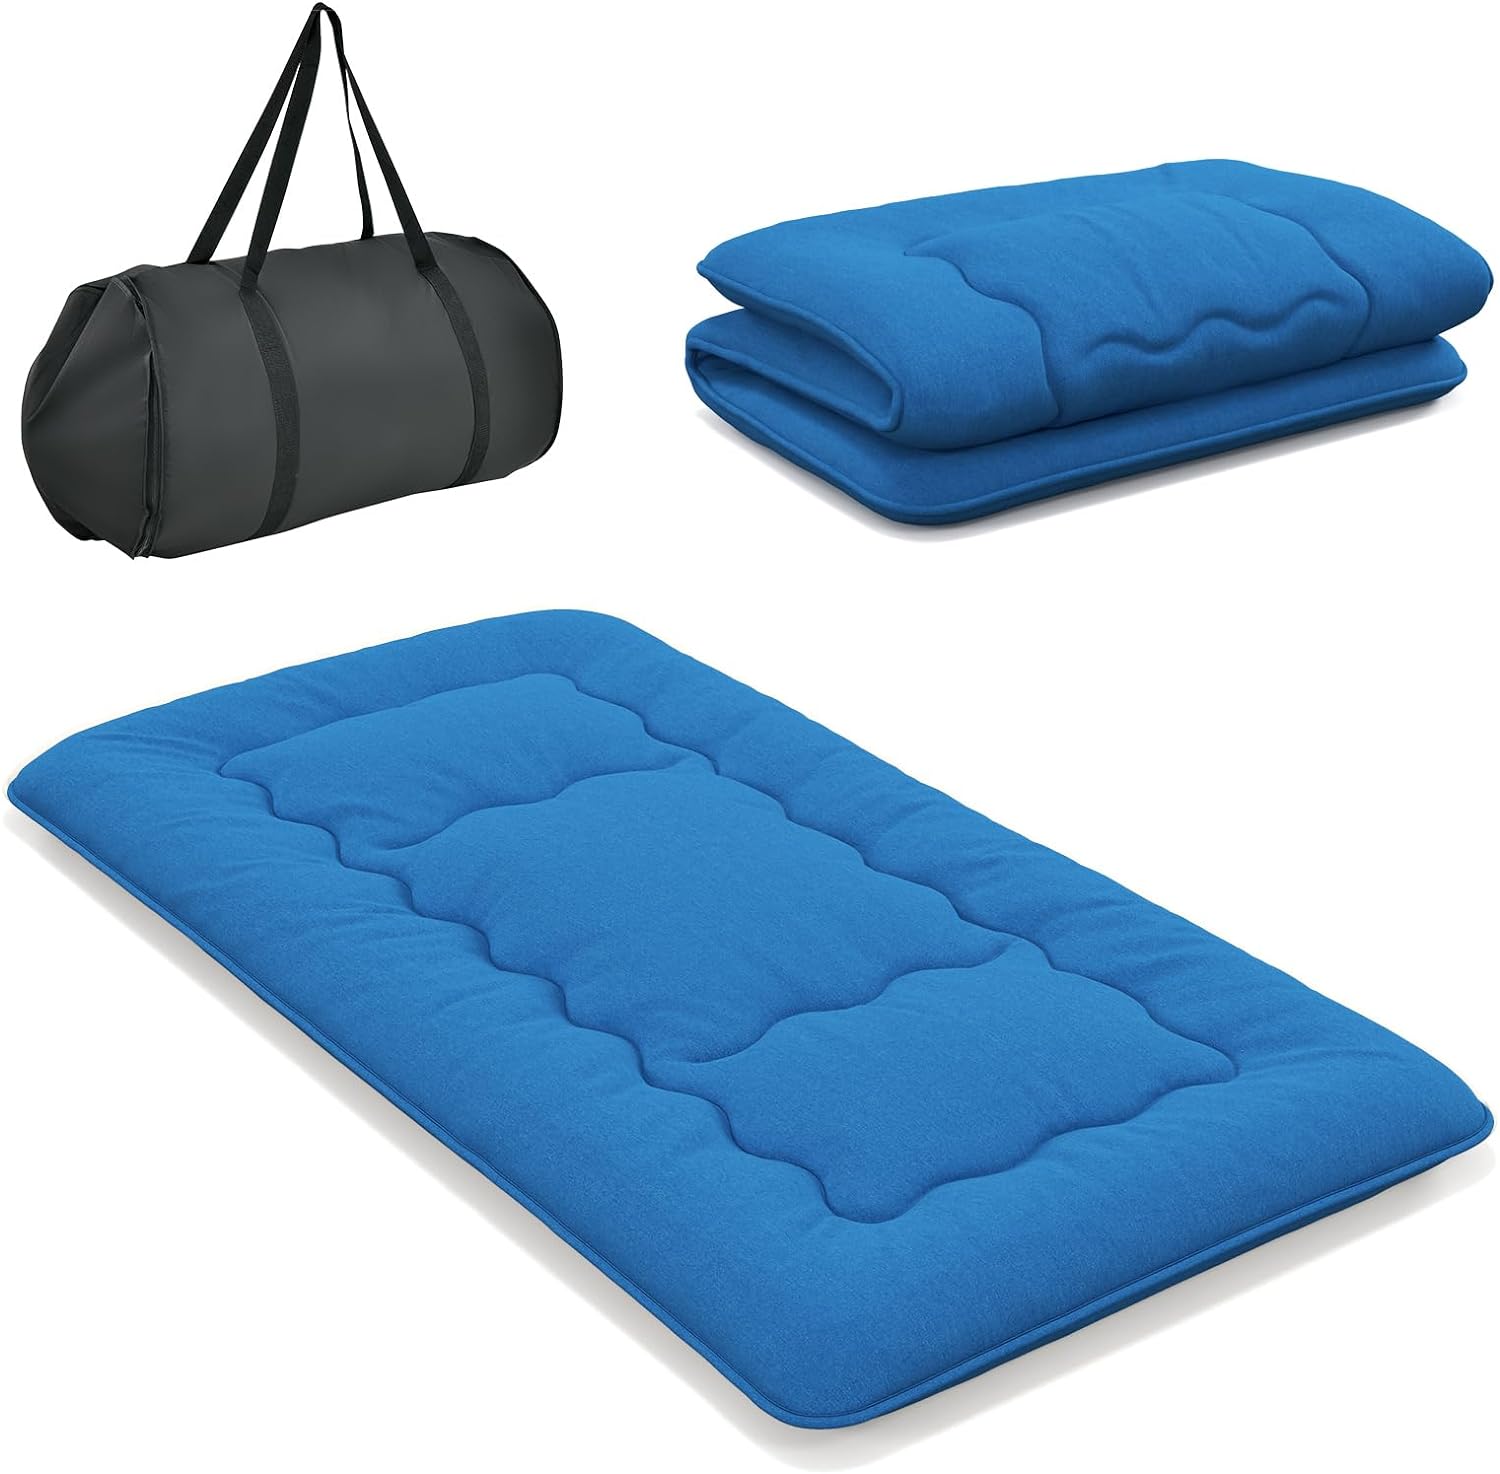 Giantex Japanese Floor Mattress Futon Mattress, Roll Up Mattress Tatami Mat with Washable Cover and Carry Bag